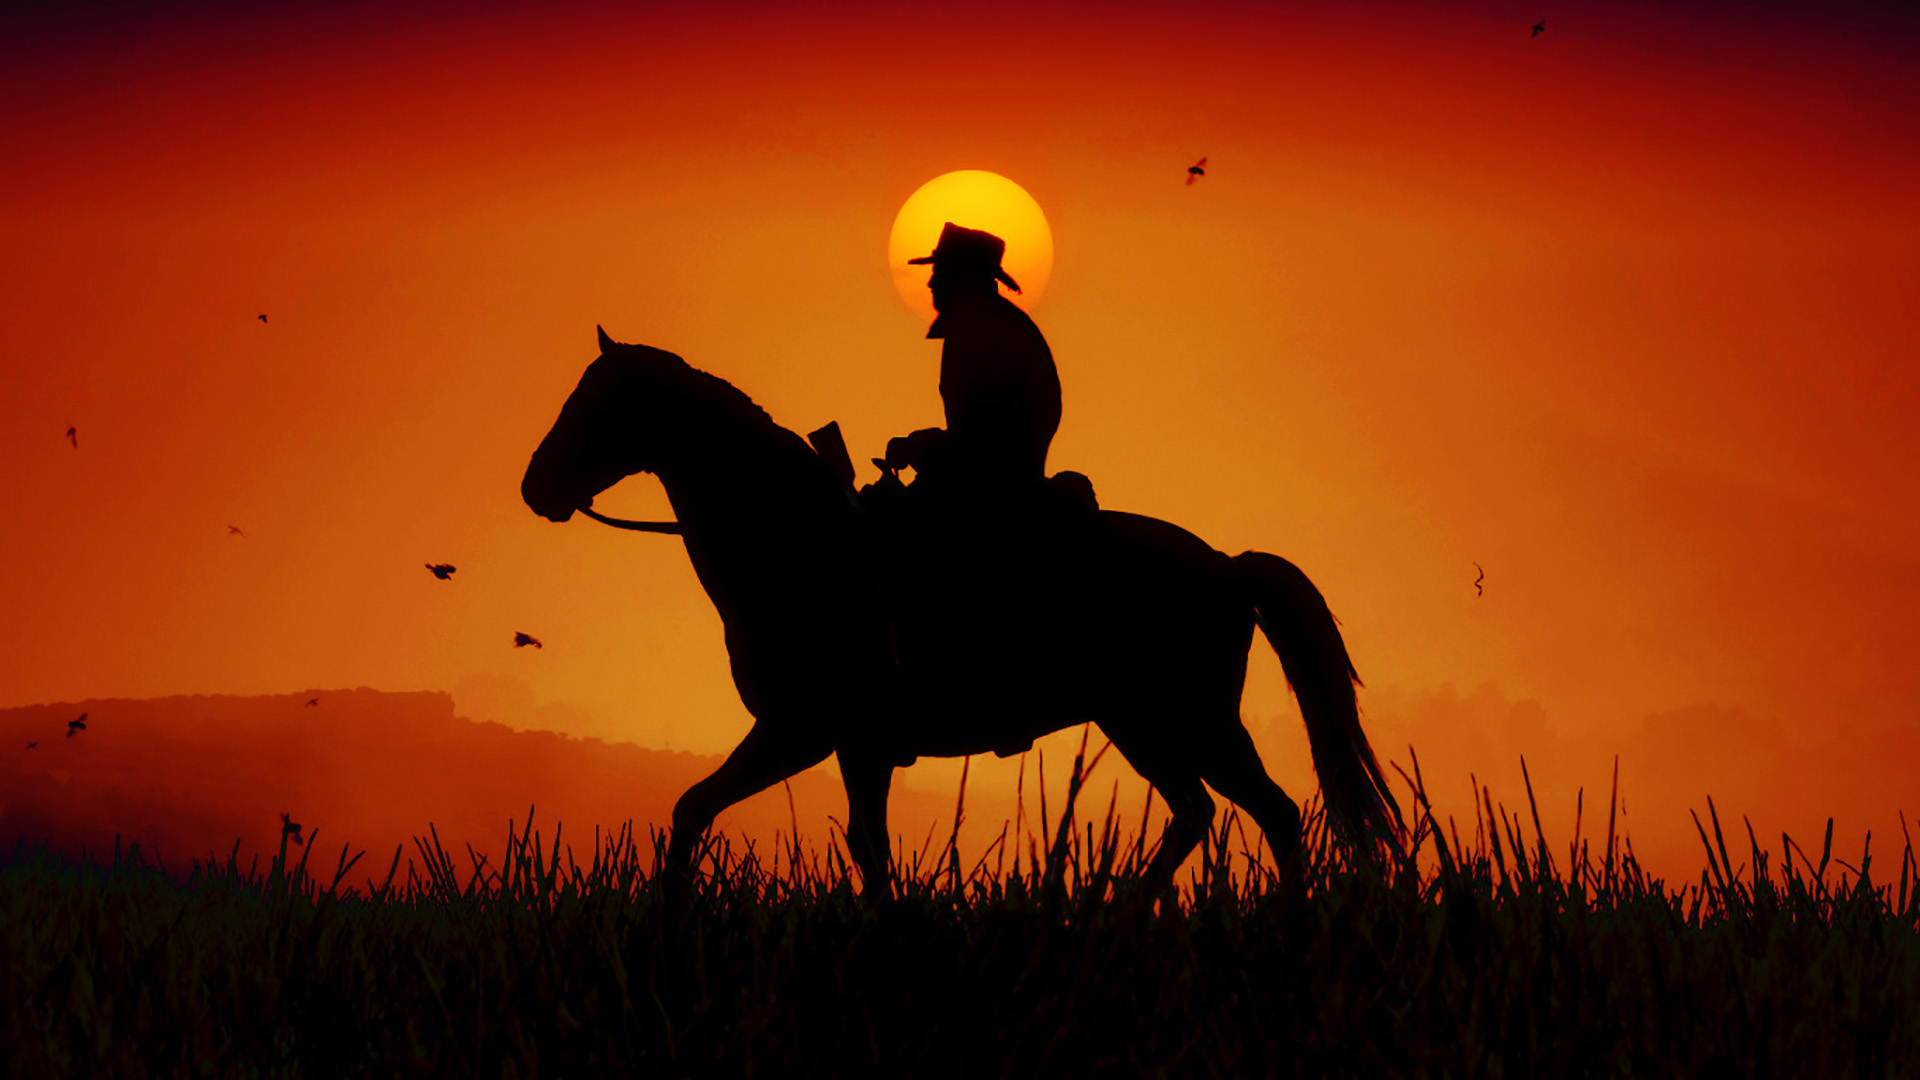 Wallpaper Of Cowboy Horse Silhouette Western Rdr2 Background